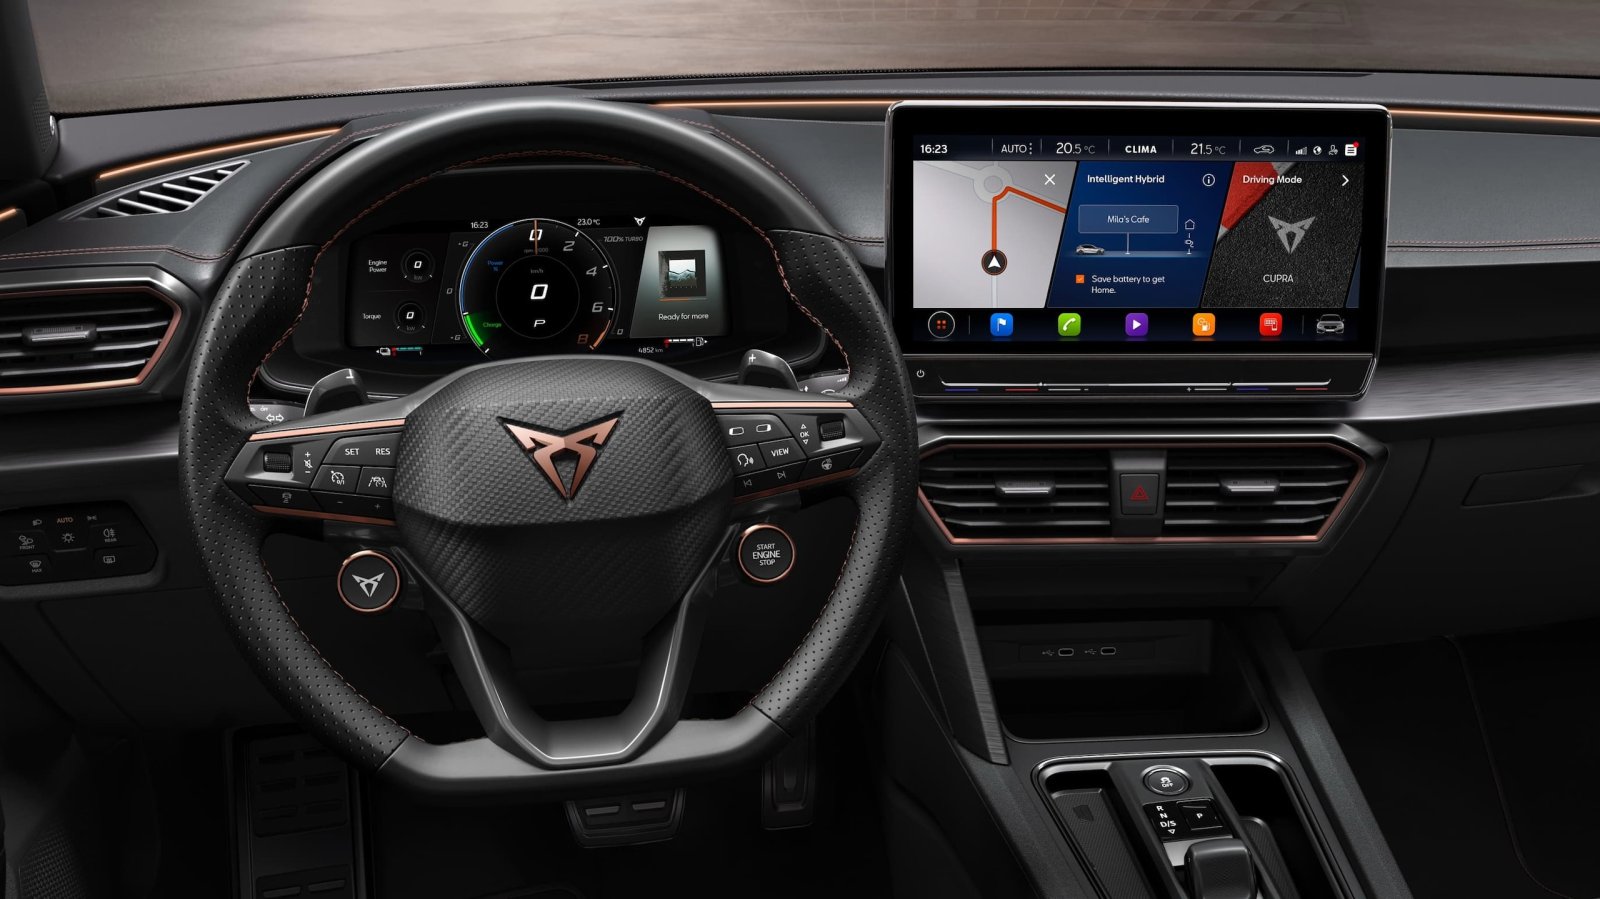 new-cupra-leon-sportstourer-ehybrid-family-sports-car-interior-view-of-heated-steering-wheel-with-remote-access